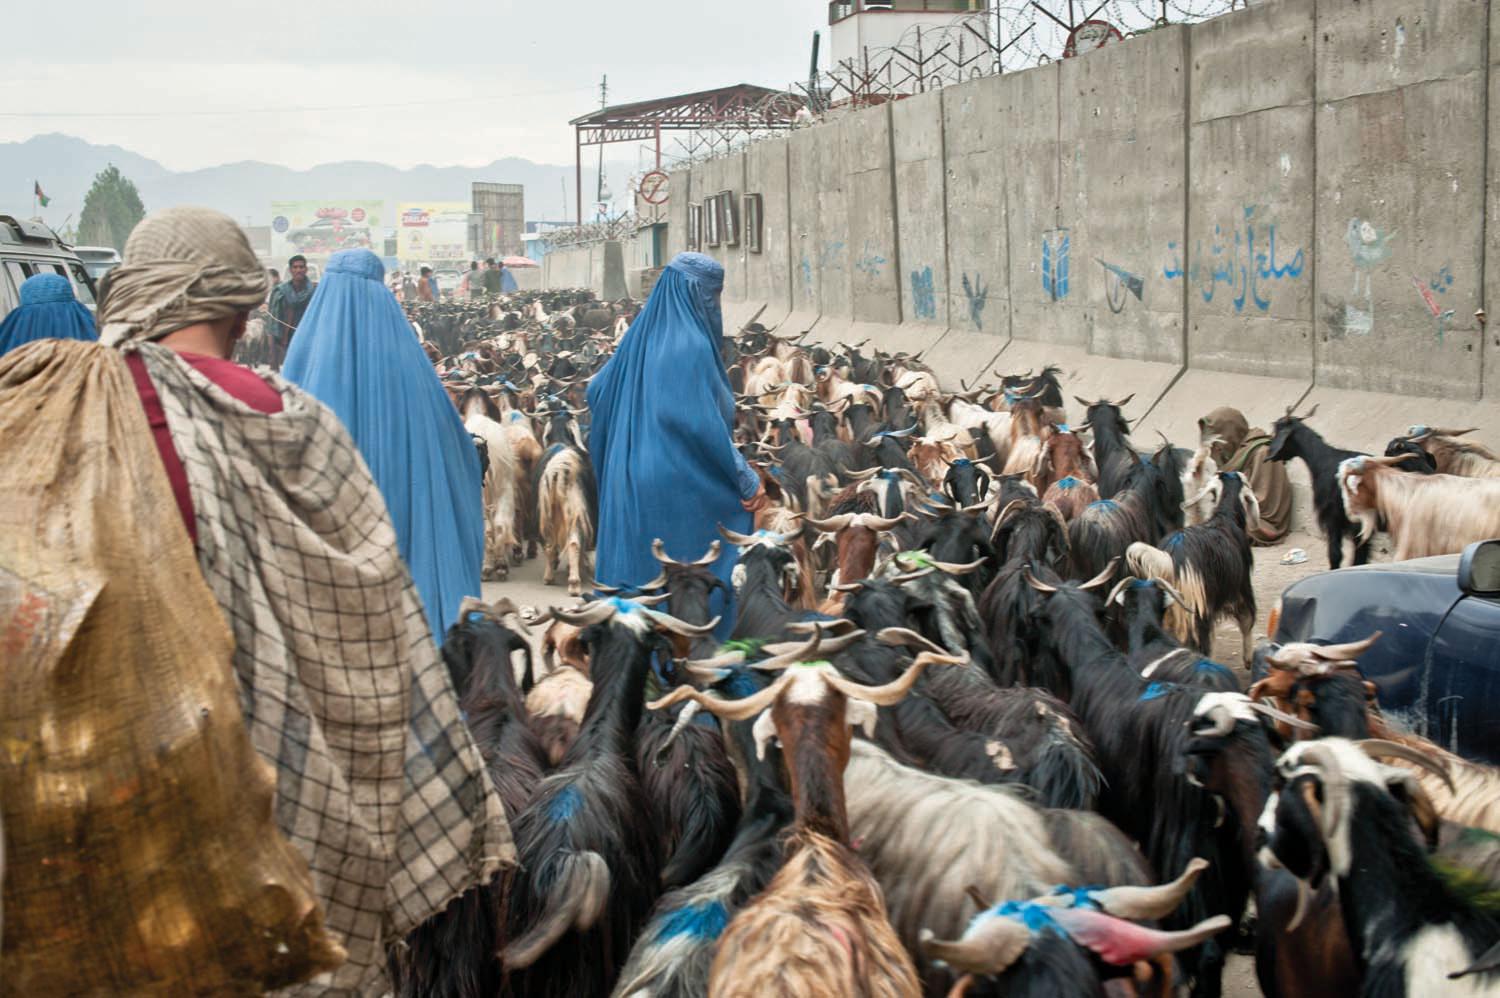 Afghan men and women herd a flock of hundreds of goats through the streets of downtown Kabul, past concrete blast walls protecting the Ministry of Finance.